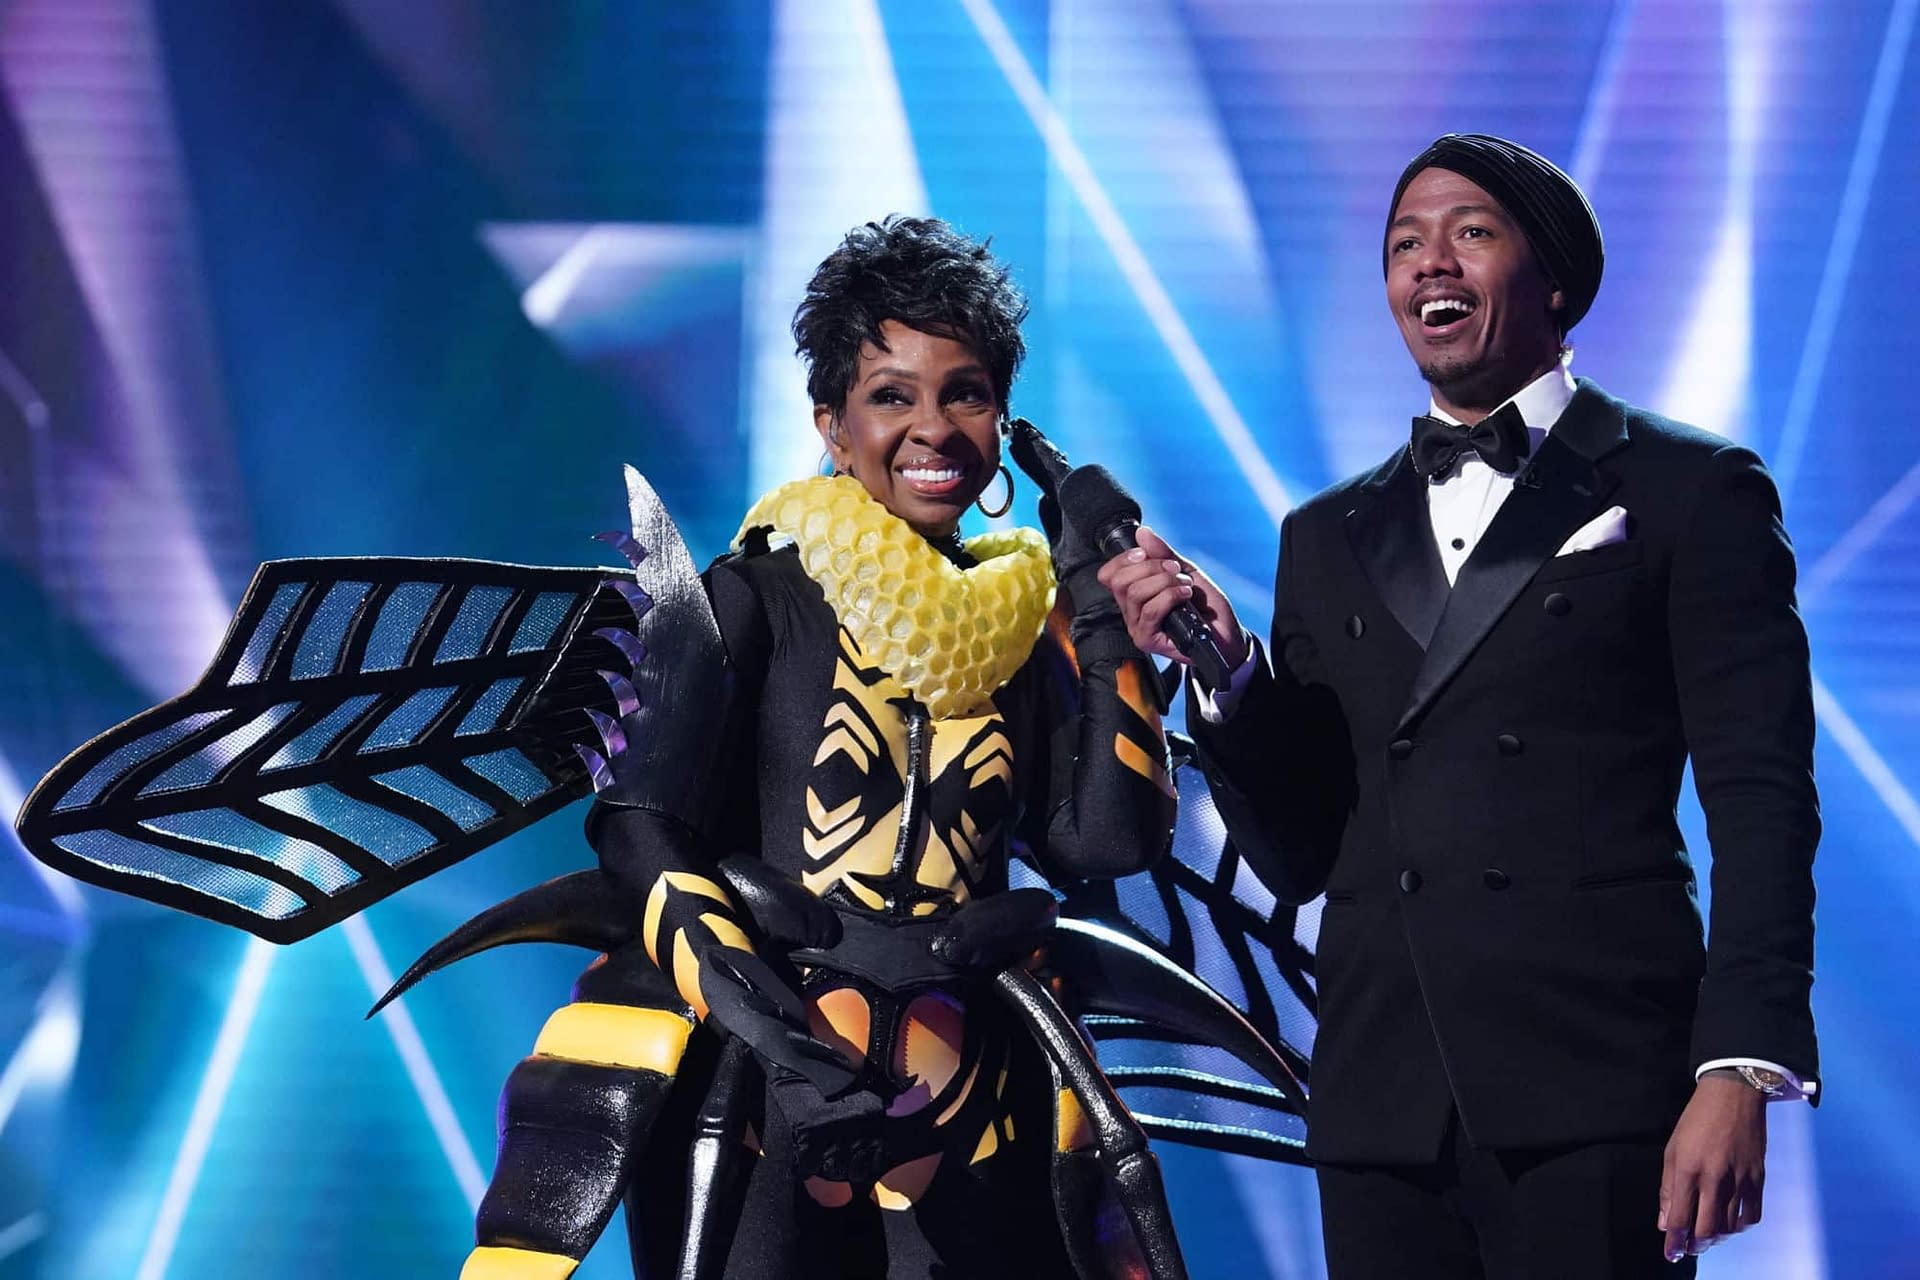 'The Masked Singer' Finale: The Final Masks Are Lifted! Were We Right? [SPOILER REVIEW]